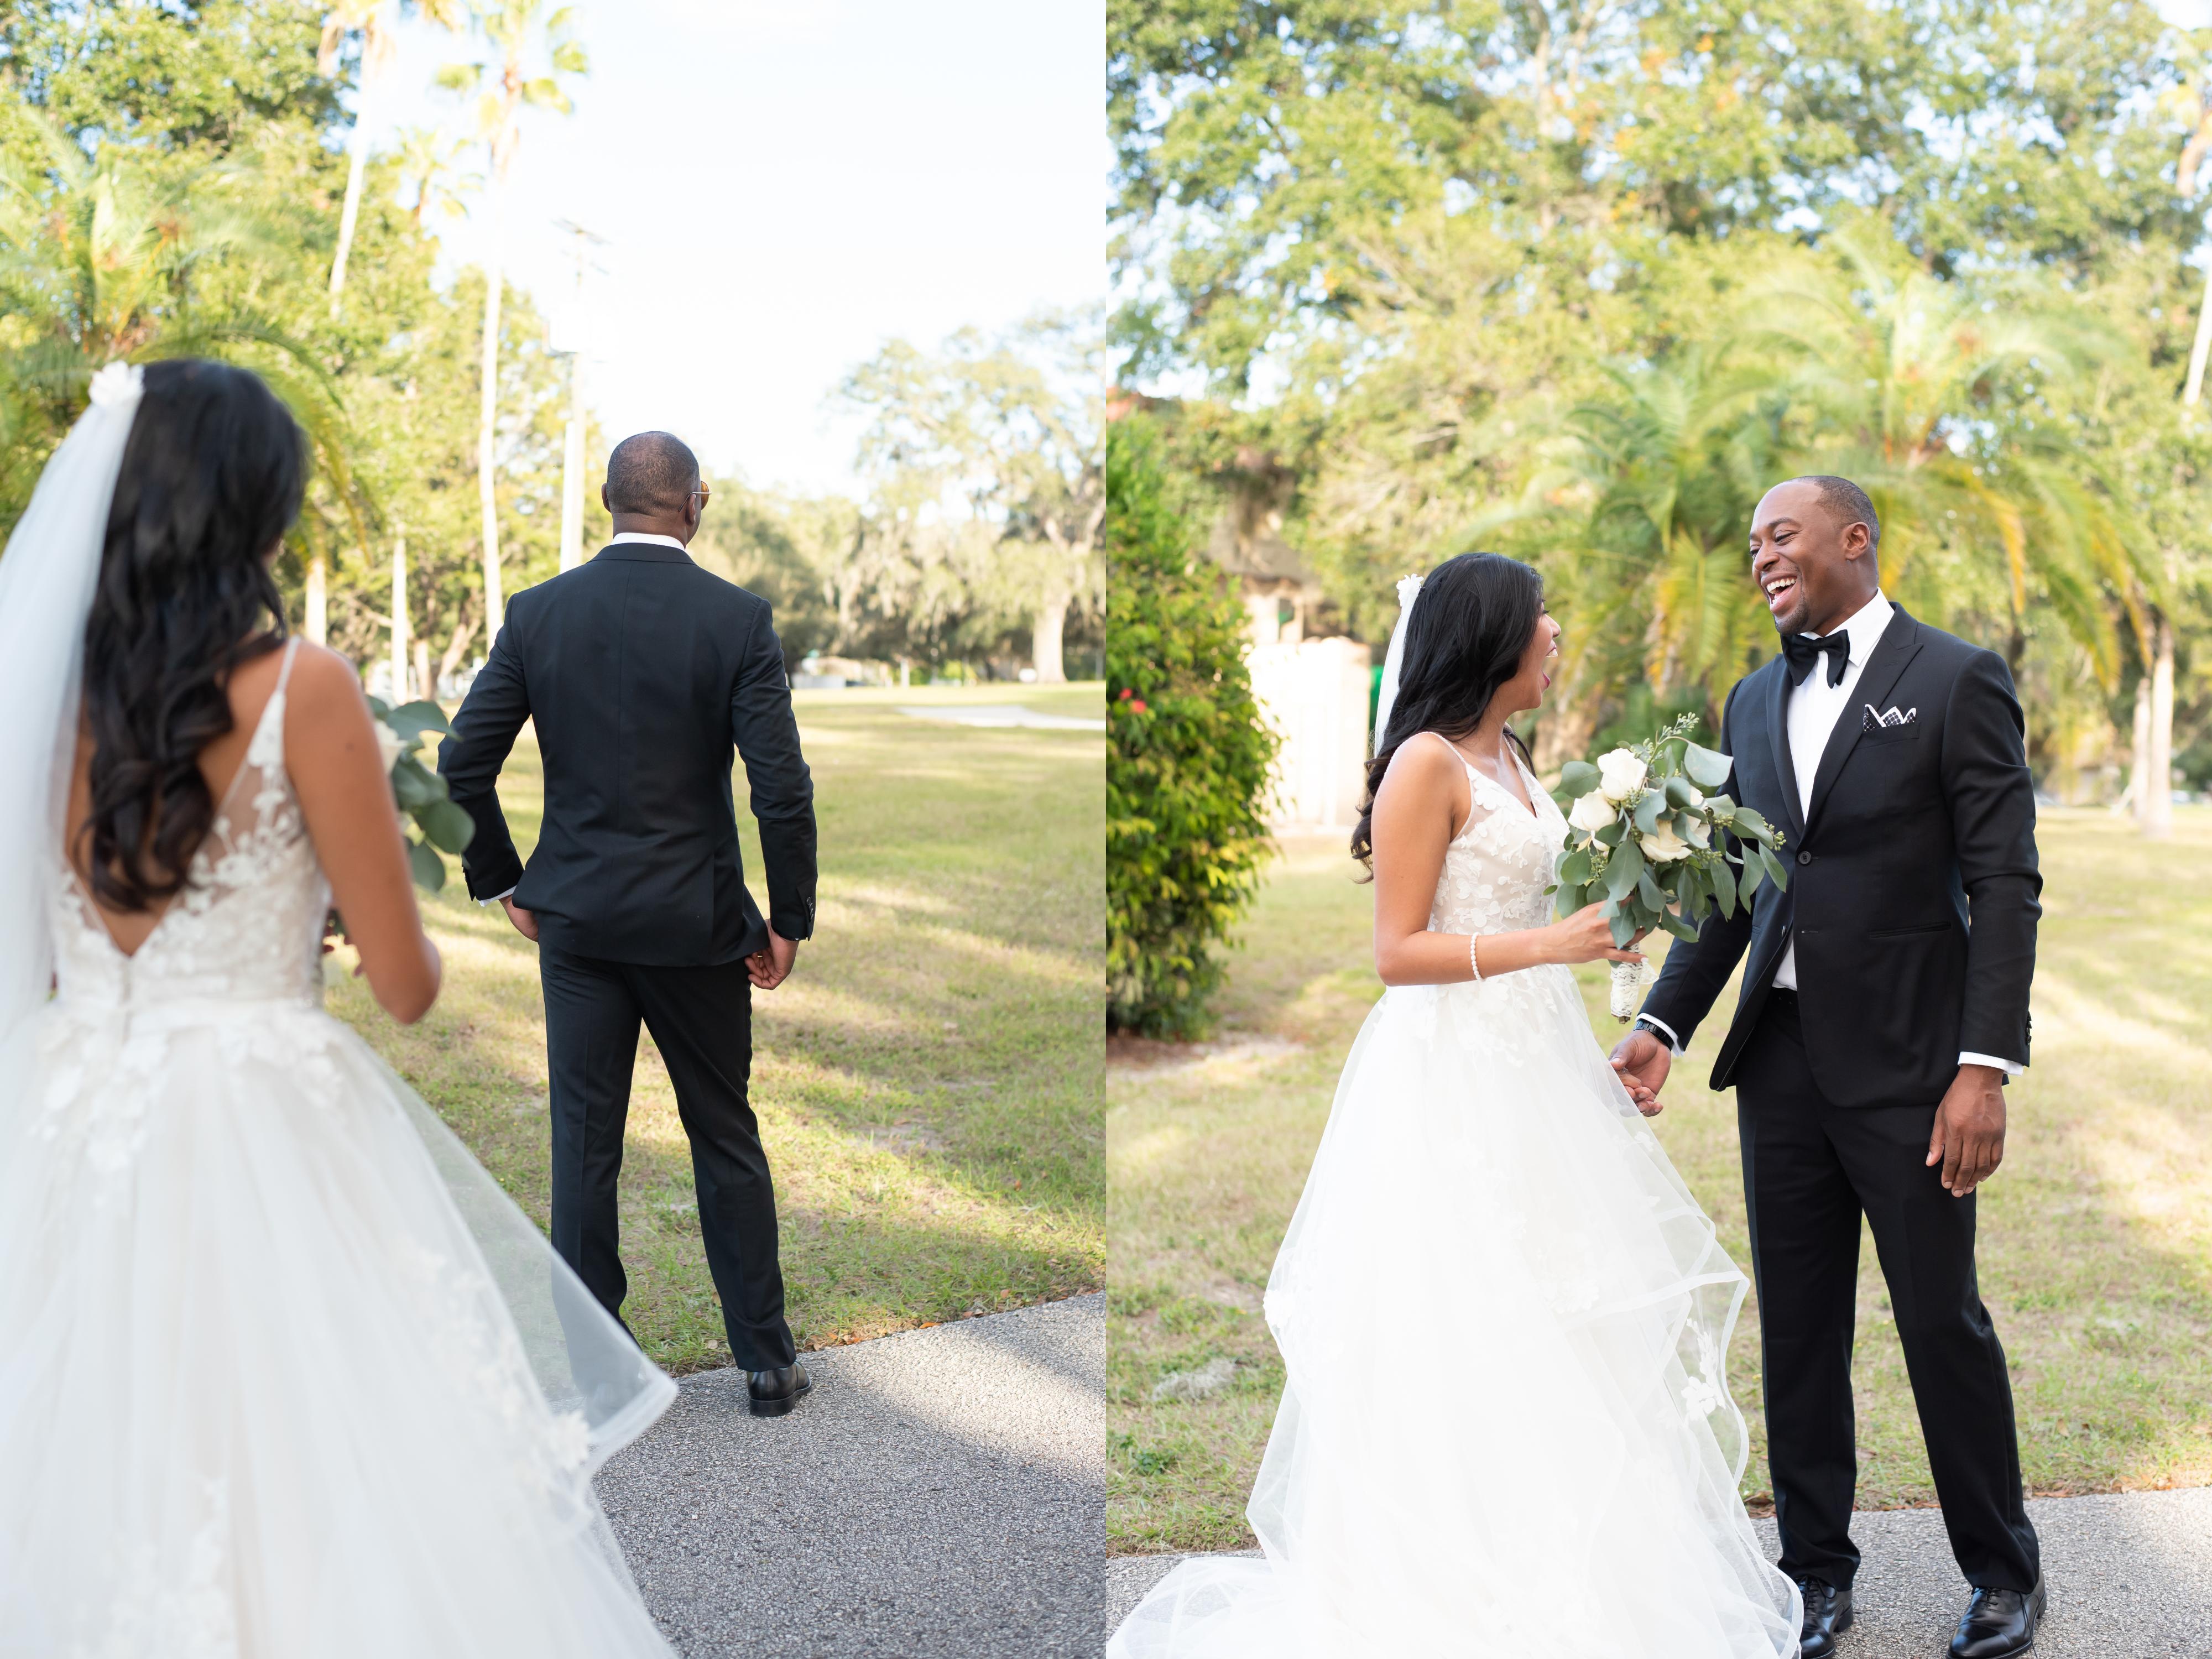 Tampa Wedding Photographer What is a First Look The Pros and Cons - Couple Having a Wedding First Look in Tampa, Florida